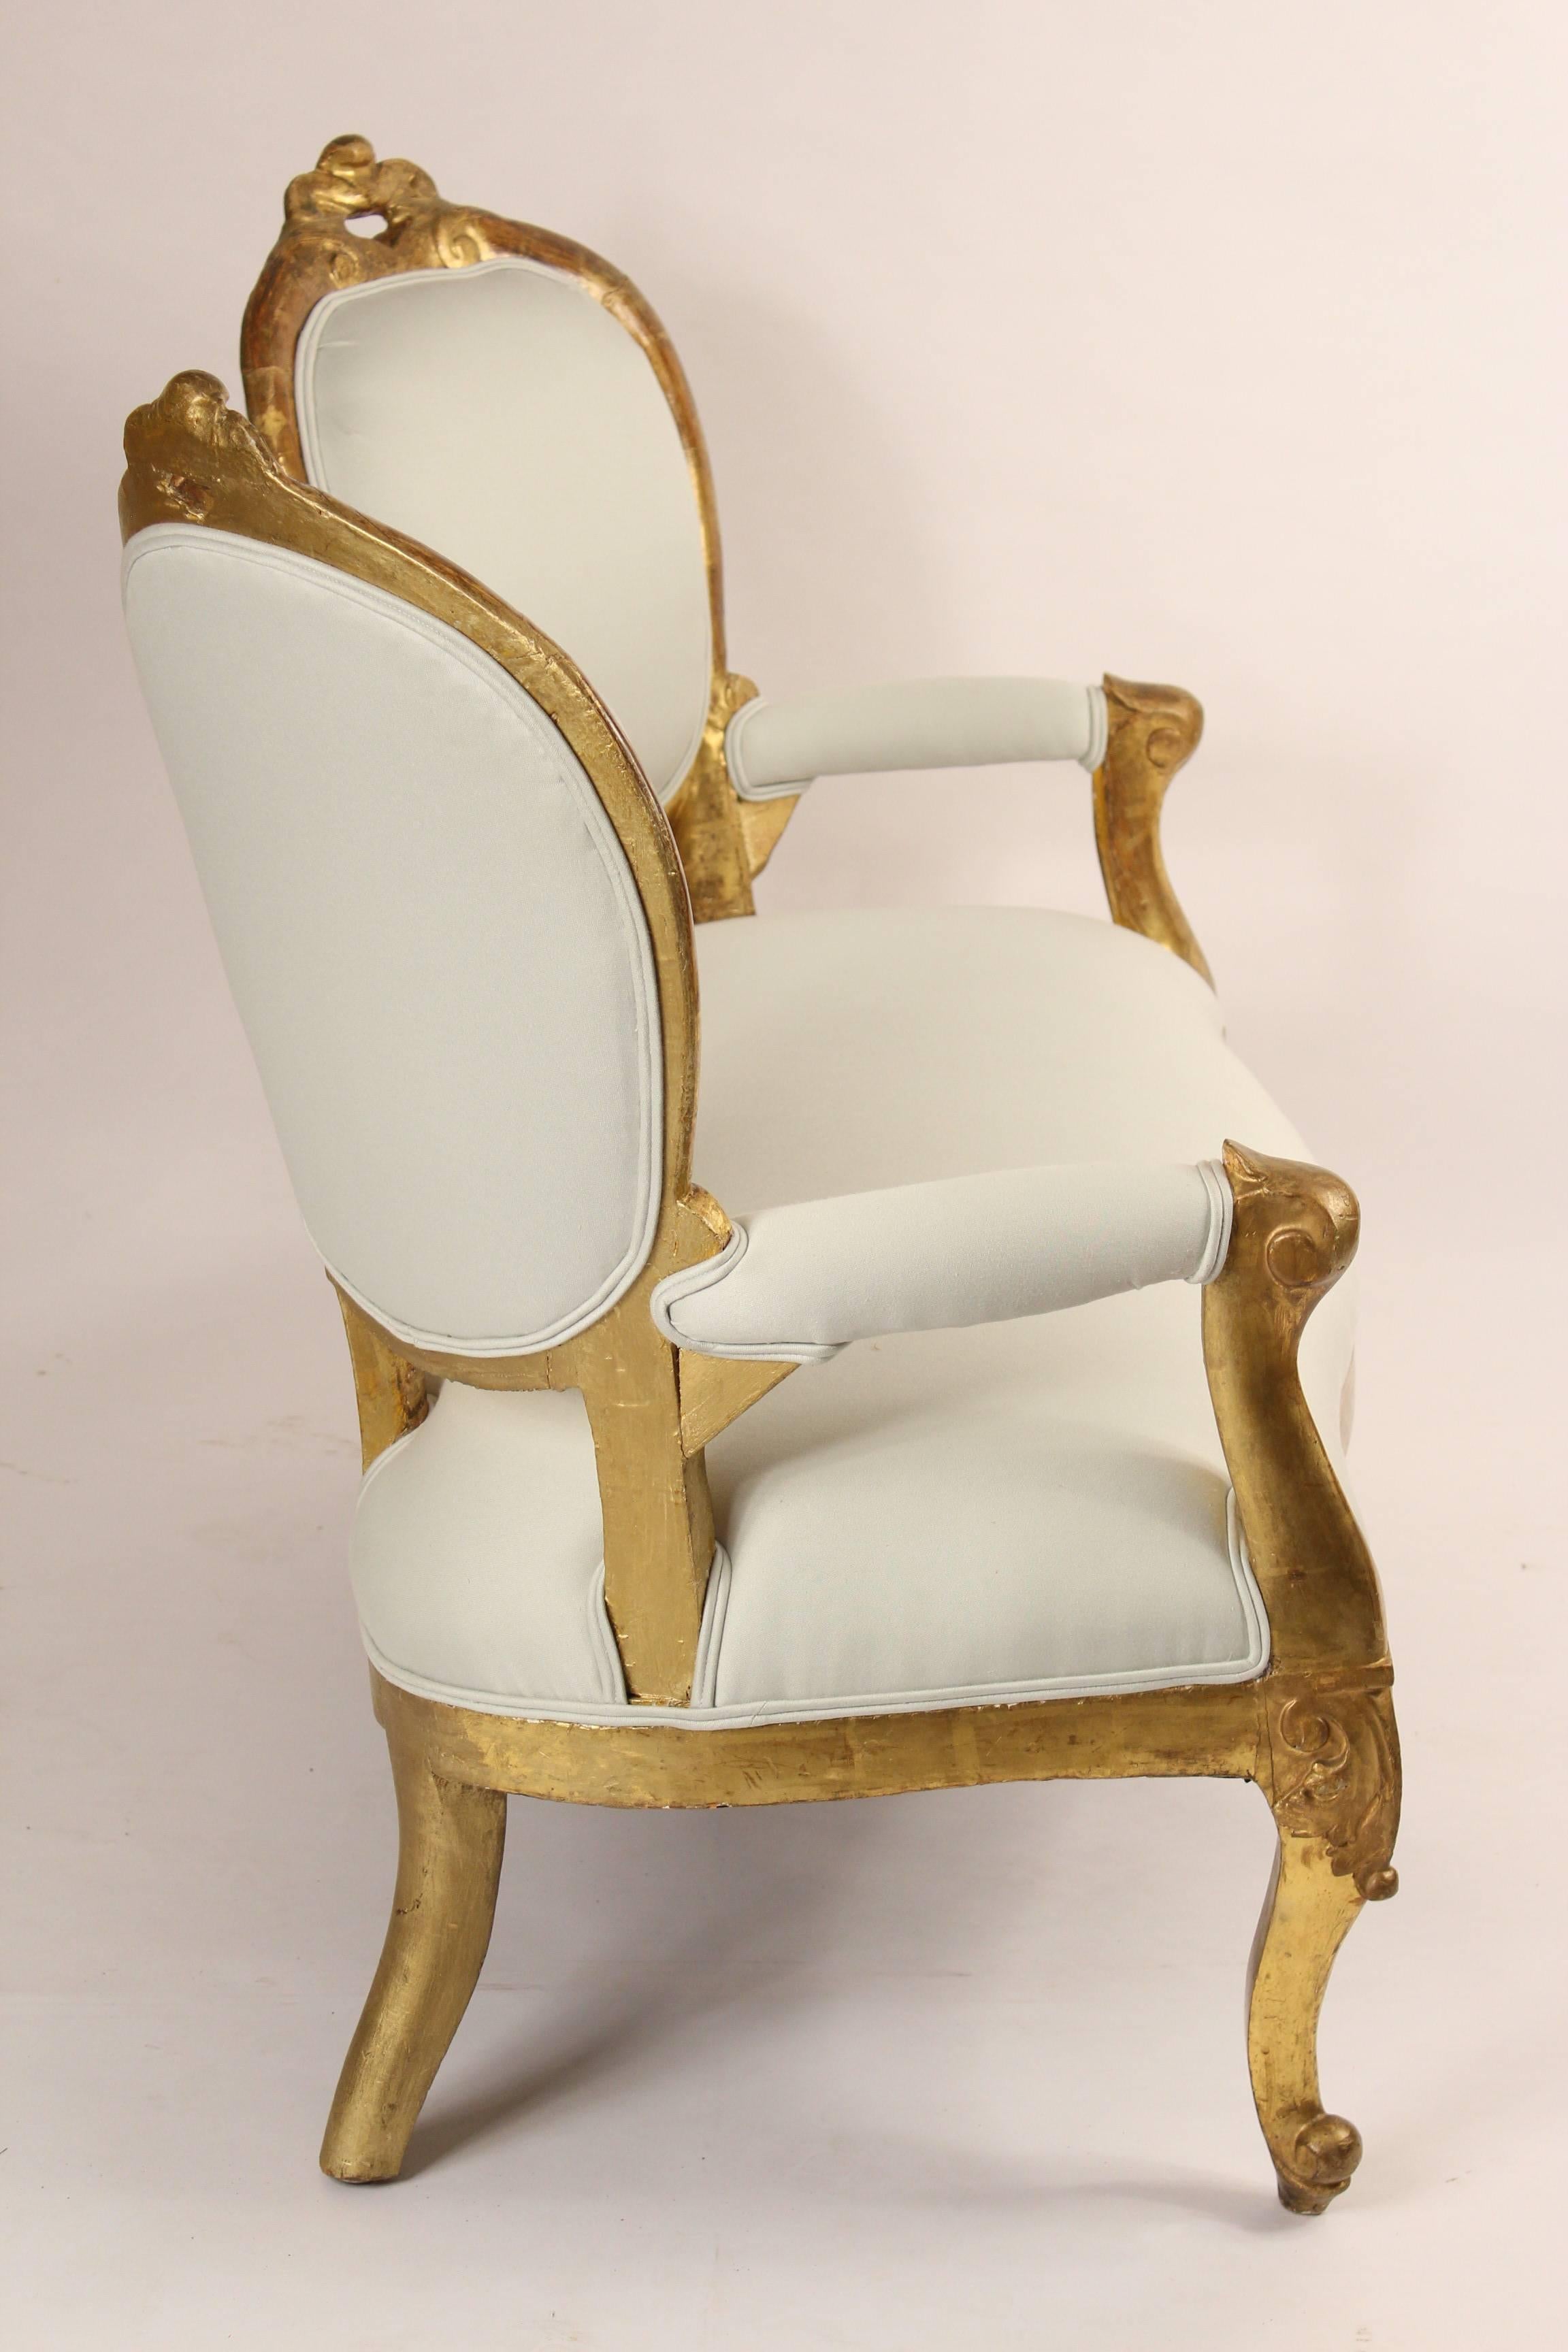 Napoleon III Venetian giltwood two chair back settee, 19th century. Very decorative and unusual design on this settee. With original gold leaf finish on the front and sides, the back side is painted.